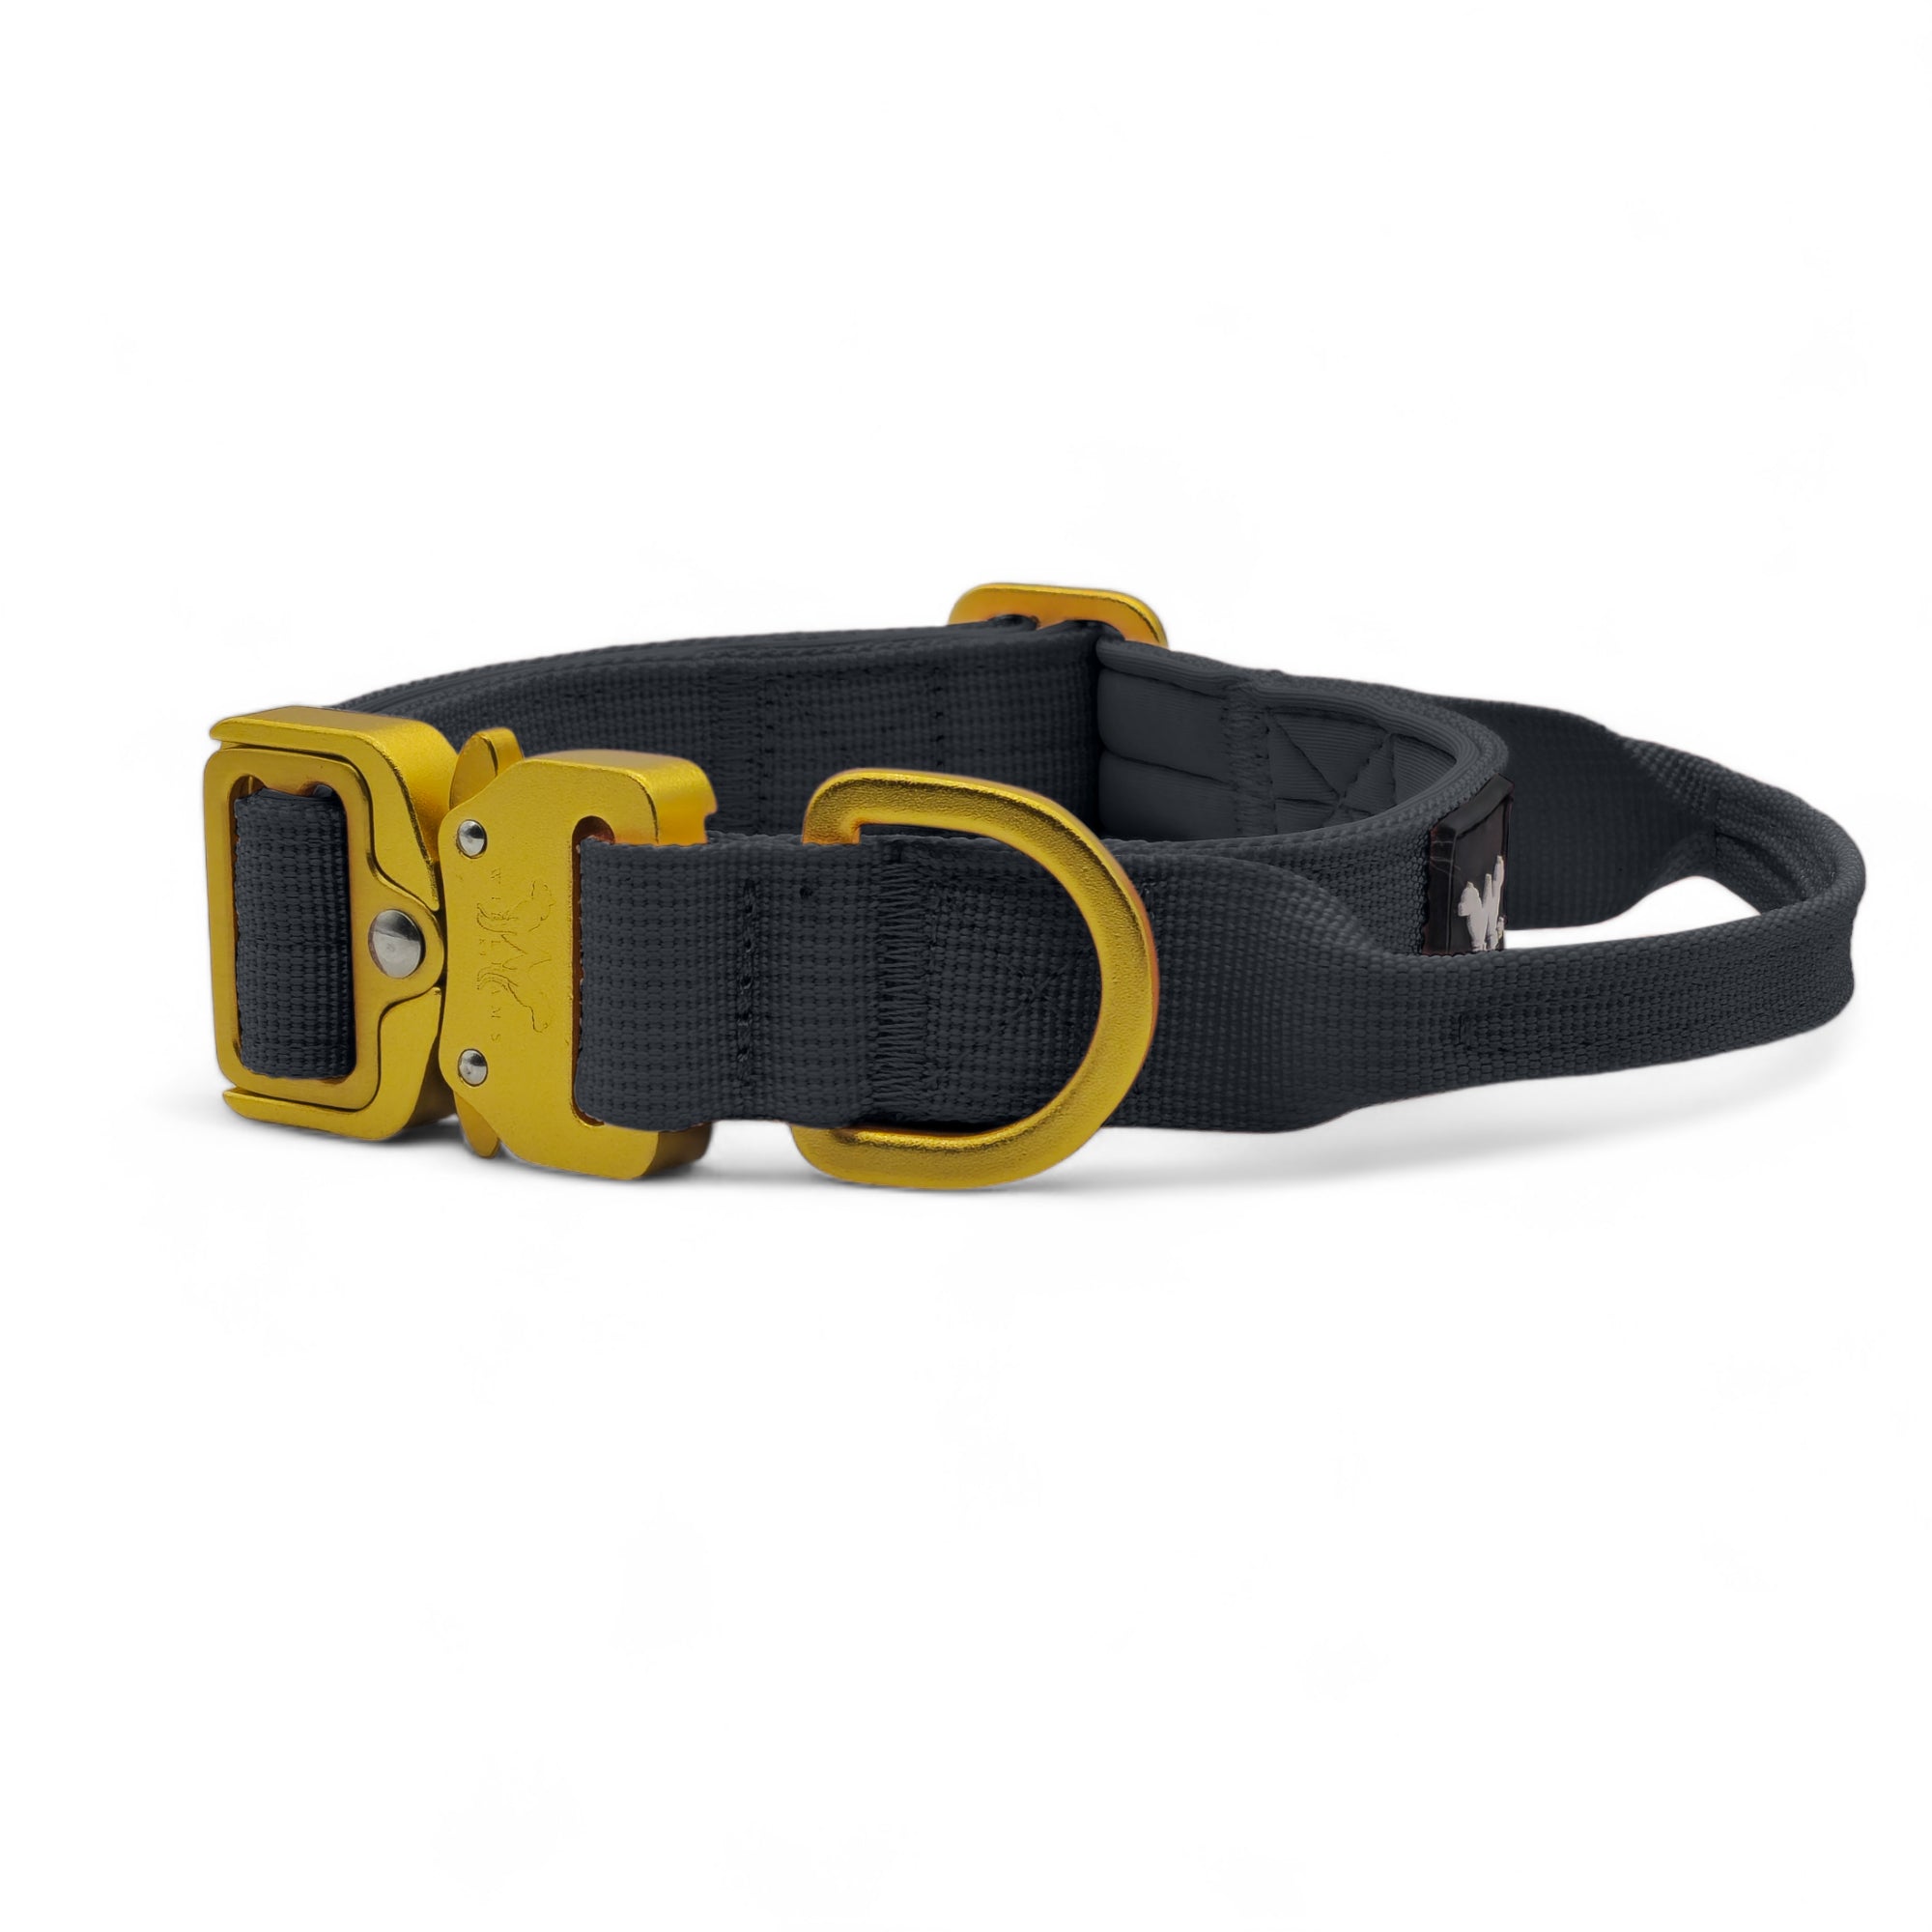 Light Tactical Collar 2.5CM Black | Triple Stitched Nylon Lightweight Gold Aluminium Buckle + D Ring Adjustable Collar With Handle